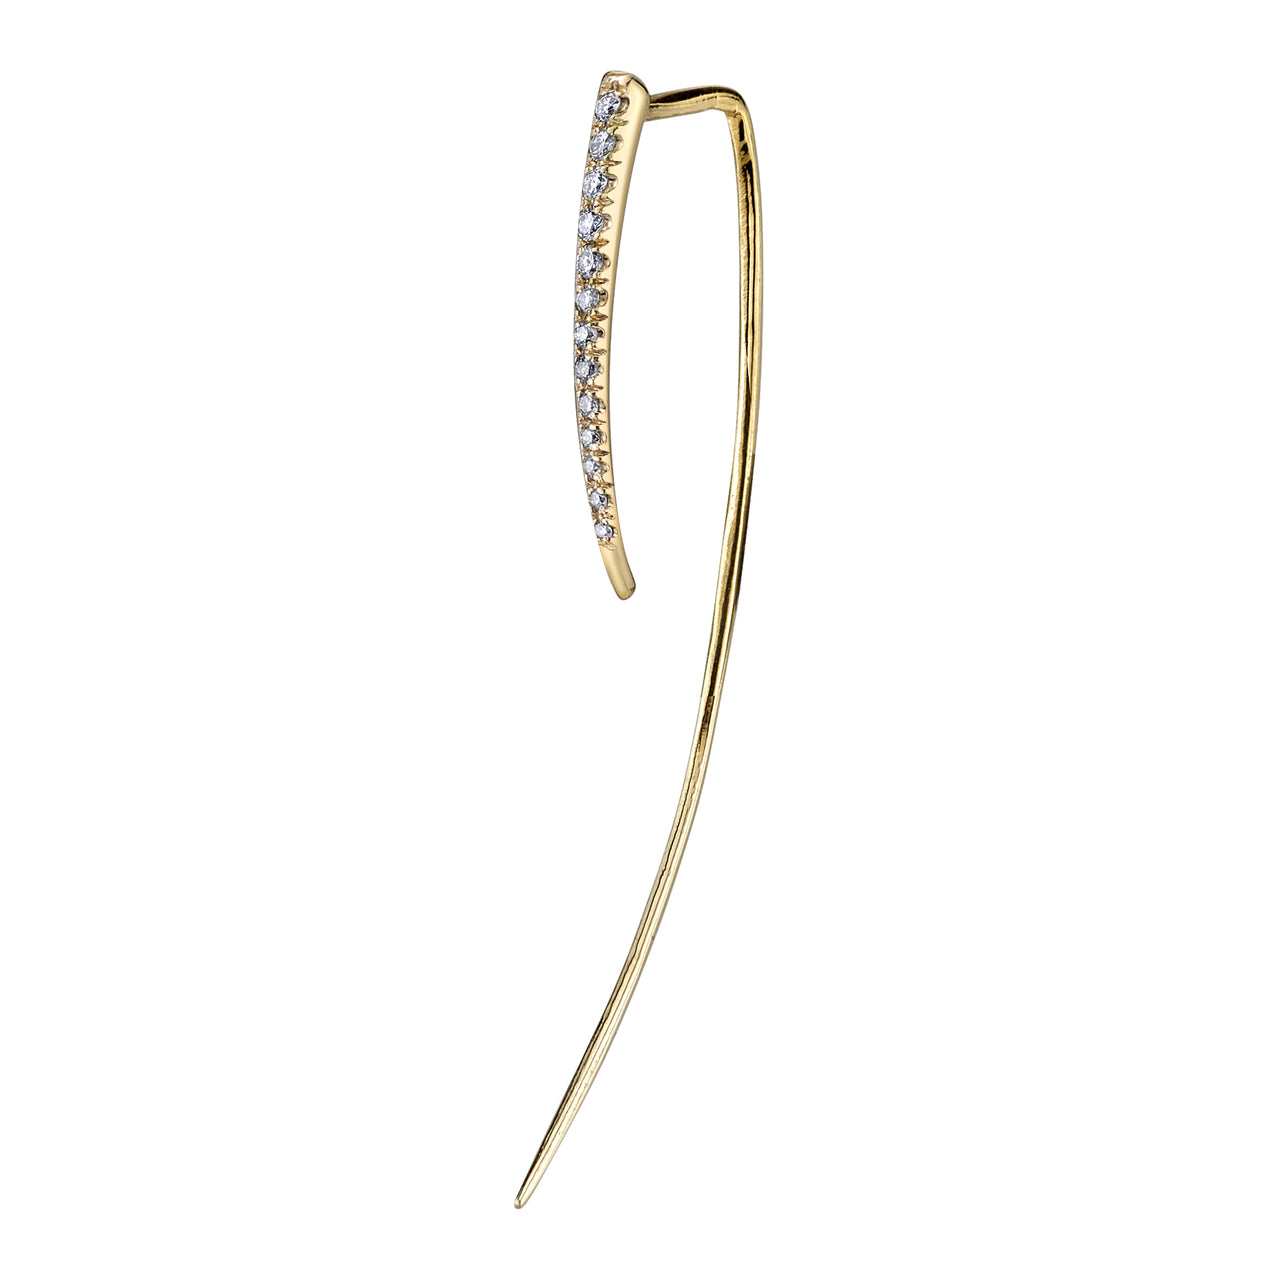 XL Classic Infinite Tusk Earring with White Pave Diamonds (Sold Out)